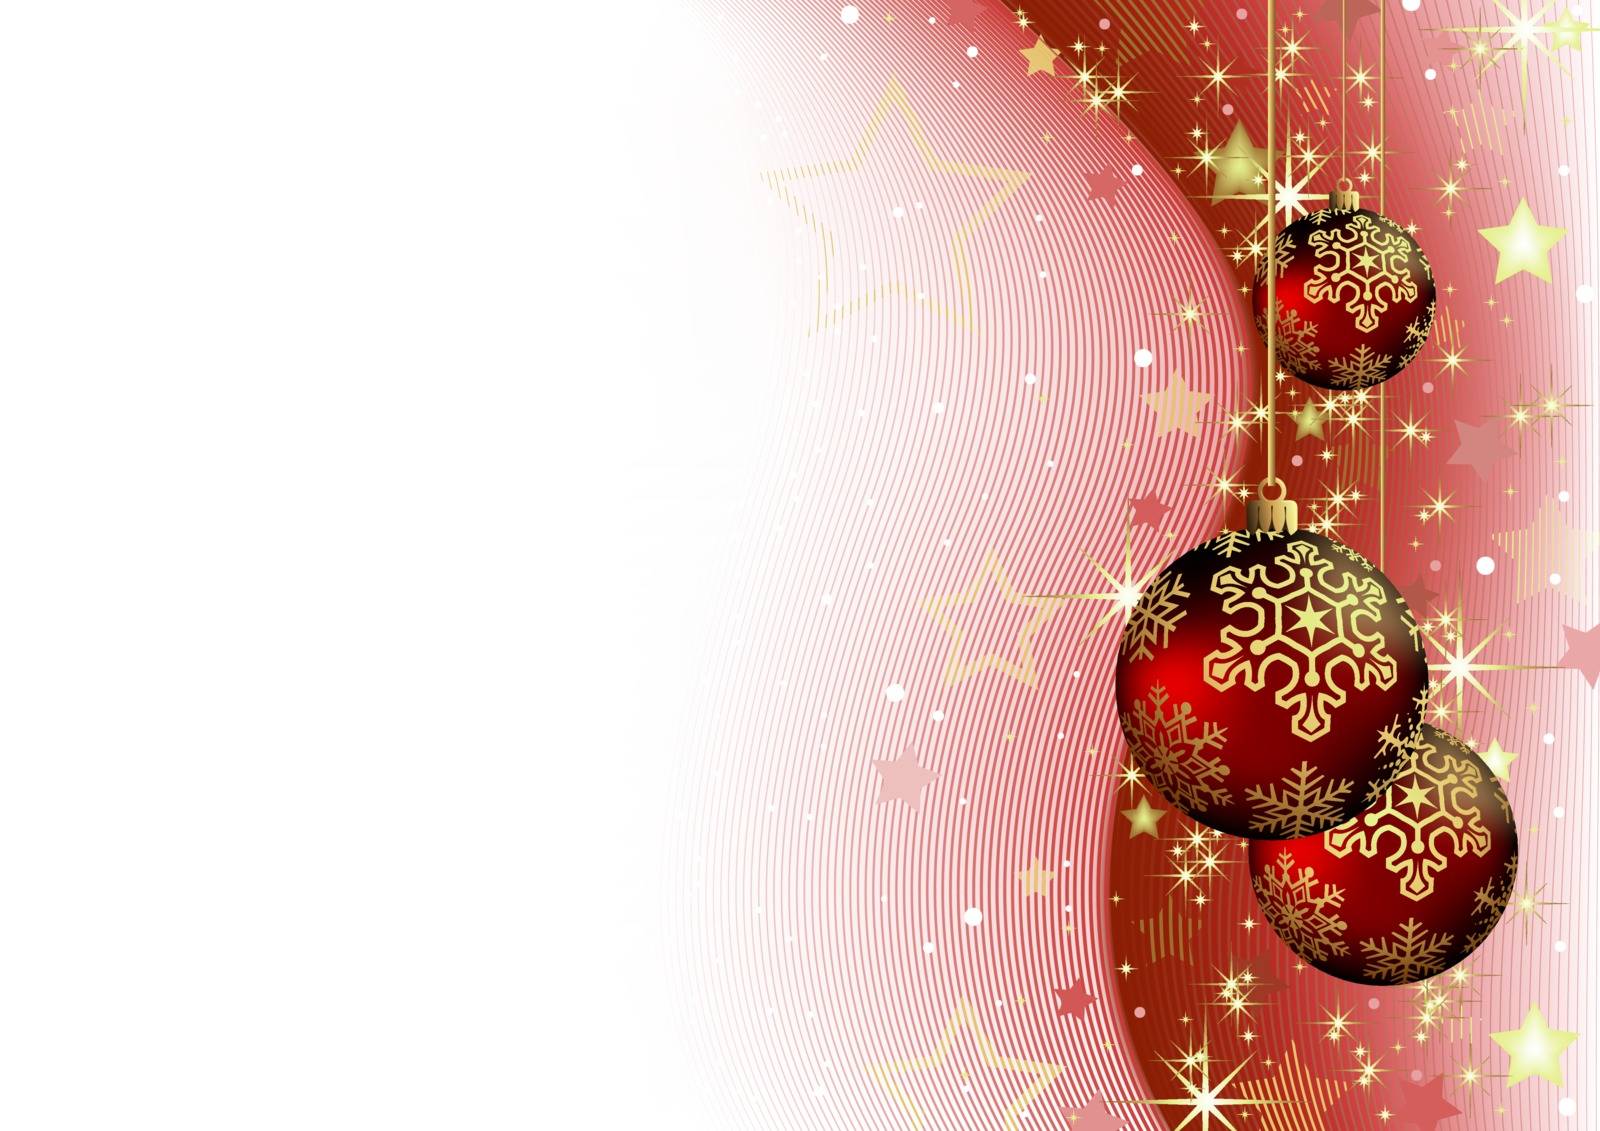 Christmas Illustration with Red Baubles over Striped Background with Golden Stars and Sparkling Decoration - Vector